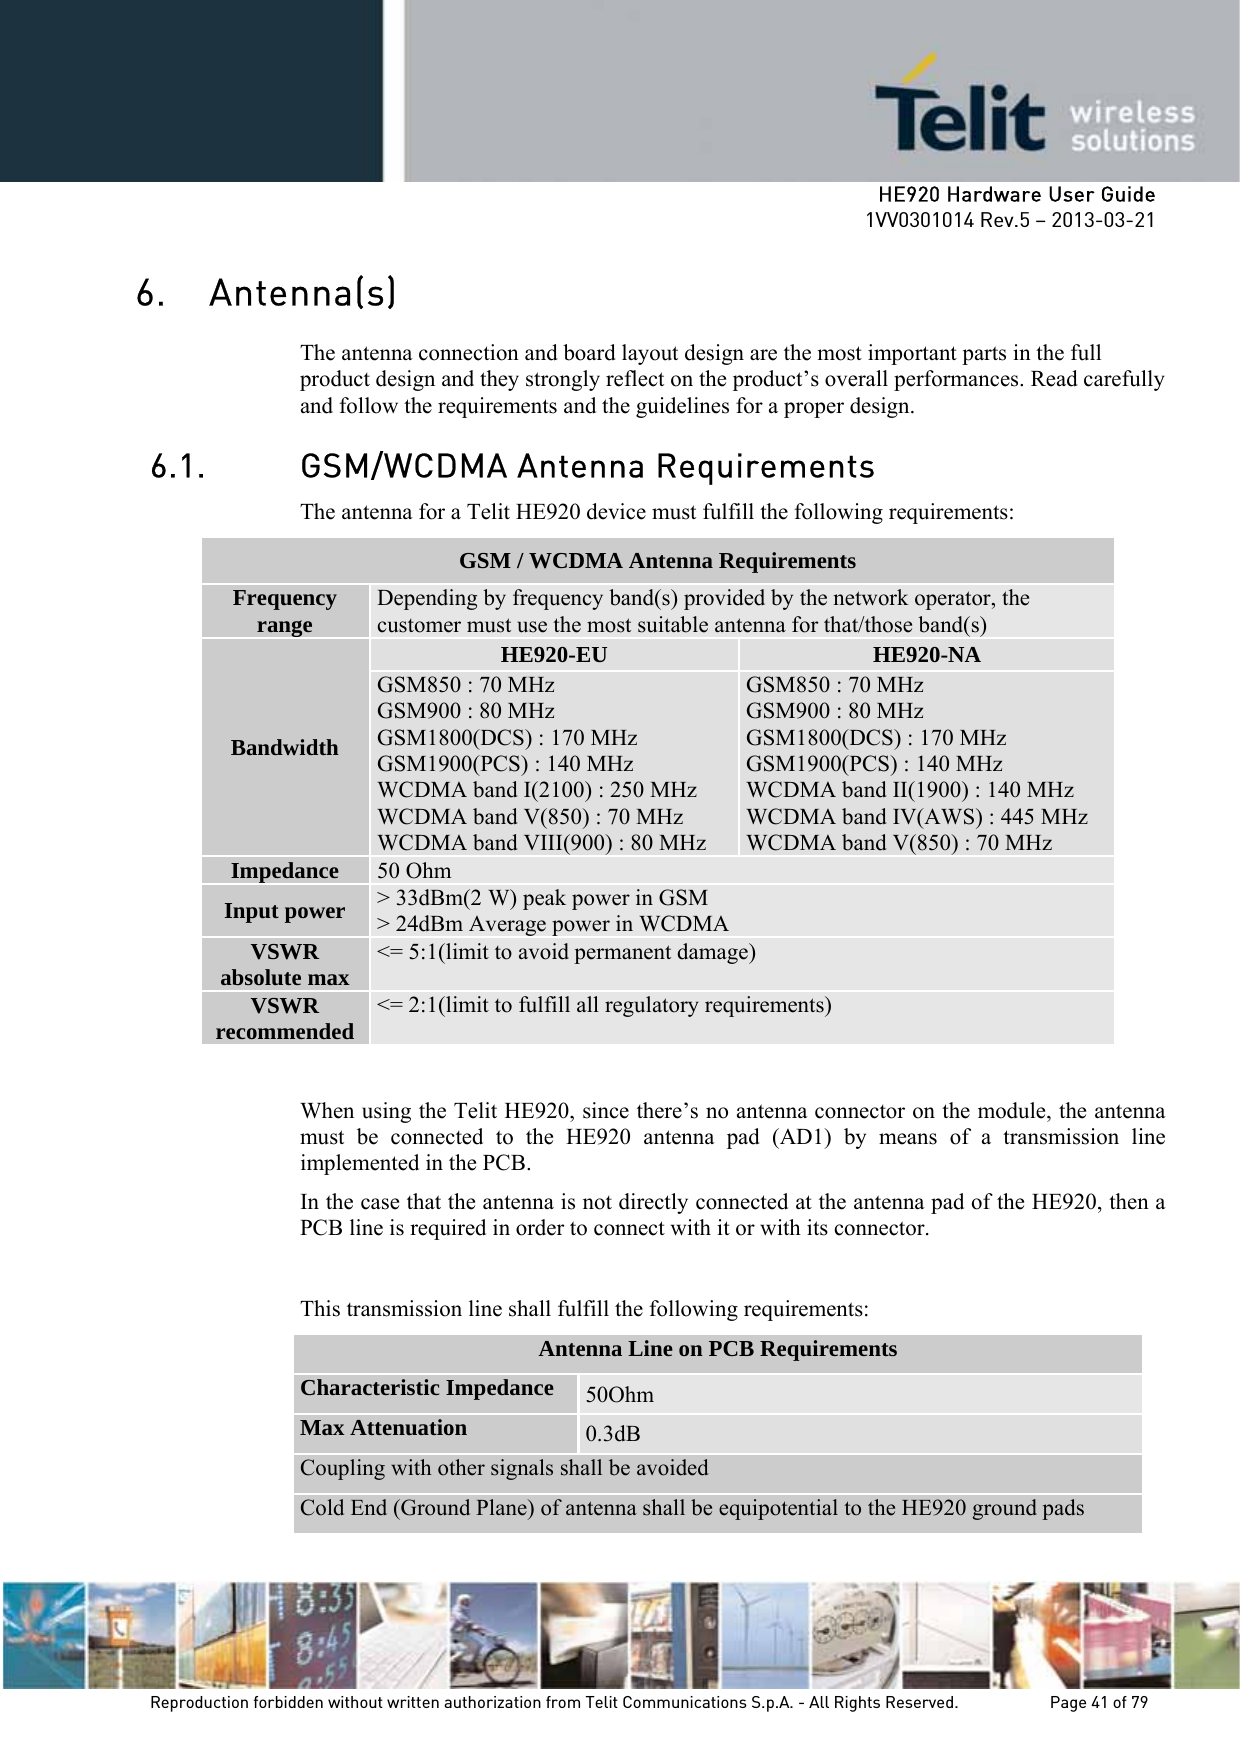     HE920 Hardware User Guide 1VV0301014 Rev.5 – 2013-03-21 Reproduction forbidden without written authorization from Telit Communications S.p.A. - All Rights Reserved.    Page 41 of 79  6. Antenna(s) The antenna connection and board layout design are the most important parts in the full product design and they strongly reflect on the product’s overall performances. Read carefully and follow the requirements and the guidelines for a proper design. 6.1. GSM/WCDMA Antenna Requirements The antenna for a Telit HE920 device must fulfill the following requirements:  When using the Telit HE920, since there’s no antenna connector on the module, the antenna must be connected to the HE920 antenna pad (AD1) by means of a transmission line implemented in the PCB. In the case that the antenna is not directly connected at the antenna pad of the HE920, then a PCB line is required in order to connect with it or with its connector.  This transmission line shall fulfill the following requirements: Antenna Line on PCB Requirements Characteristic Impedance  50Ohm Max Attenuation  0.3dB Coupling with other signals shall be avoided Cold End (Ground Plane) of antenna shall be equipotential to the HE920 ground pads GSM / WCDMA Antenna Requirements Frequency range  Depending by frequency band(s) provided by the network operator, the customer must use the most suitable antenna for that/those band(s) Bandwidth HE920-EU  HE920-NA GSM850 : 70 MHz GSM900 : 80 MHz GSM1800(DCS) : 170 MHz GSM1900(PCS) : 140 MHz  WCDMA band I(2100) : 250 MHz WCDMA band V(850) : 70 MHz WCDMA band VIII(900) : 80 MHz GSM850 : 70 MHz GSM900 : 80 MHz GSM1800(DCS) : 170 MHz GSM1900(PCS) : 140 MHz WCDMA band II(1900) : 140 MHz WCDMA band IV(AWS) : 445 MHz WCDMA band V(850) : 70 MHz Impedance  50 Ohm Input power  &gt; 33dBm(2 W) peak power in GSM &gt; 24dBm Average power in WCDMA VSWR absolute max  &lt;= 5:1(limit to avoid permanent damage) VSWR recommended  &lt;= 2:1(limit to fulfill all regulatory requirements) 